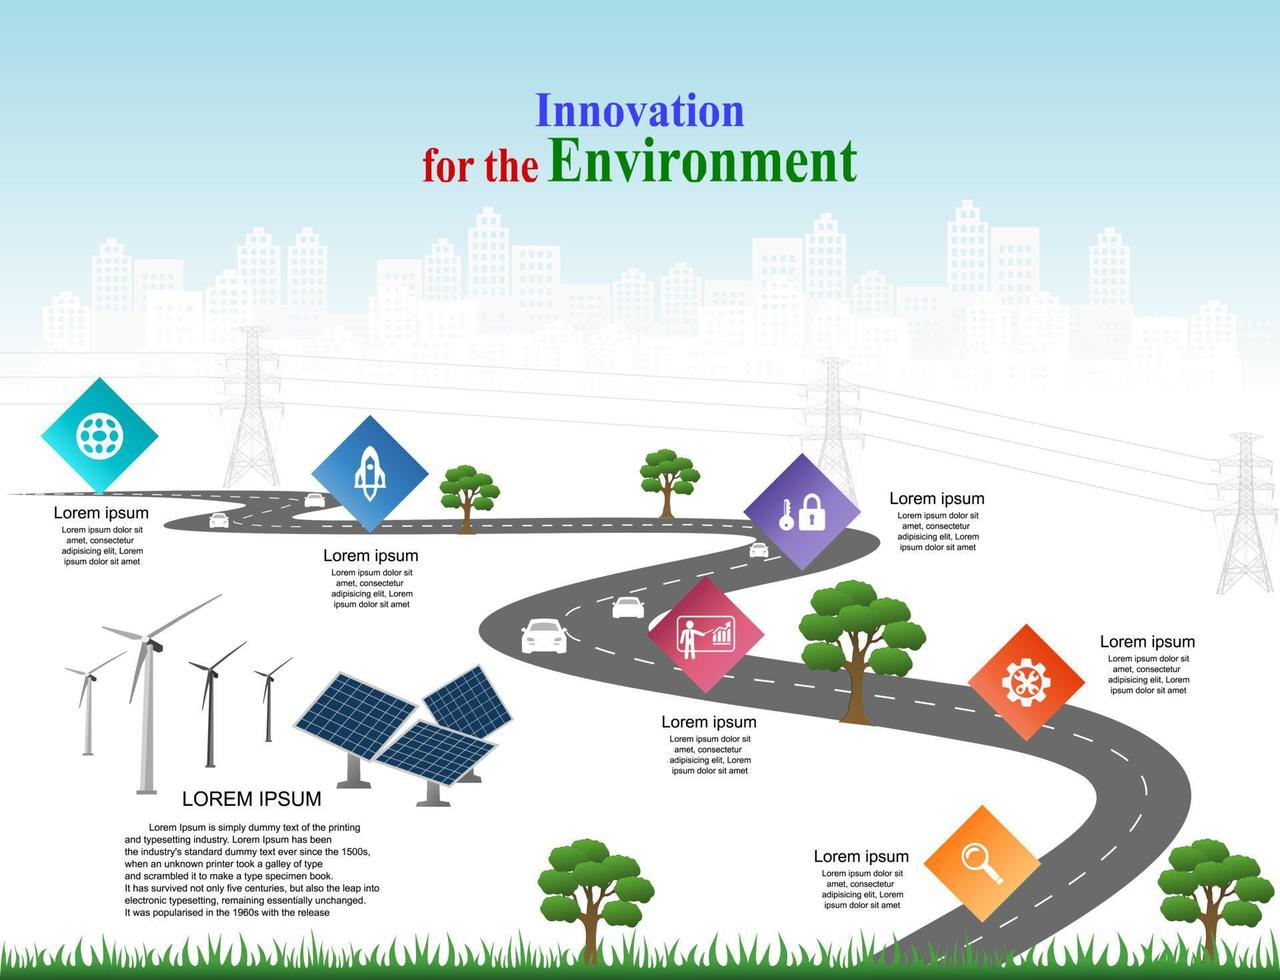 Vector template infographic Timeline of business operations with flags and placeholders on curved roads. Innovation, for environment and society city that can live together. Symbols, steps for success